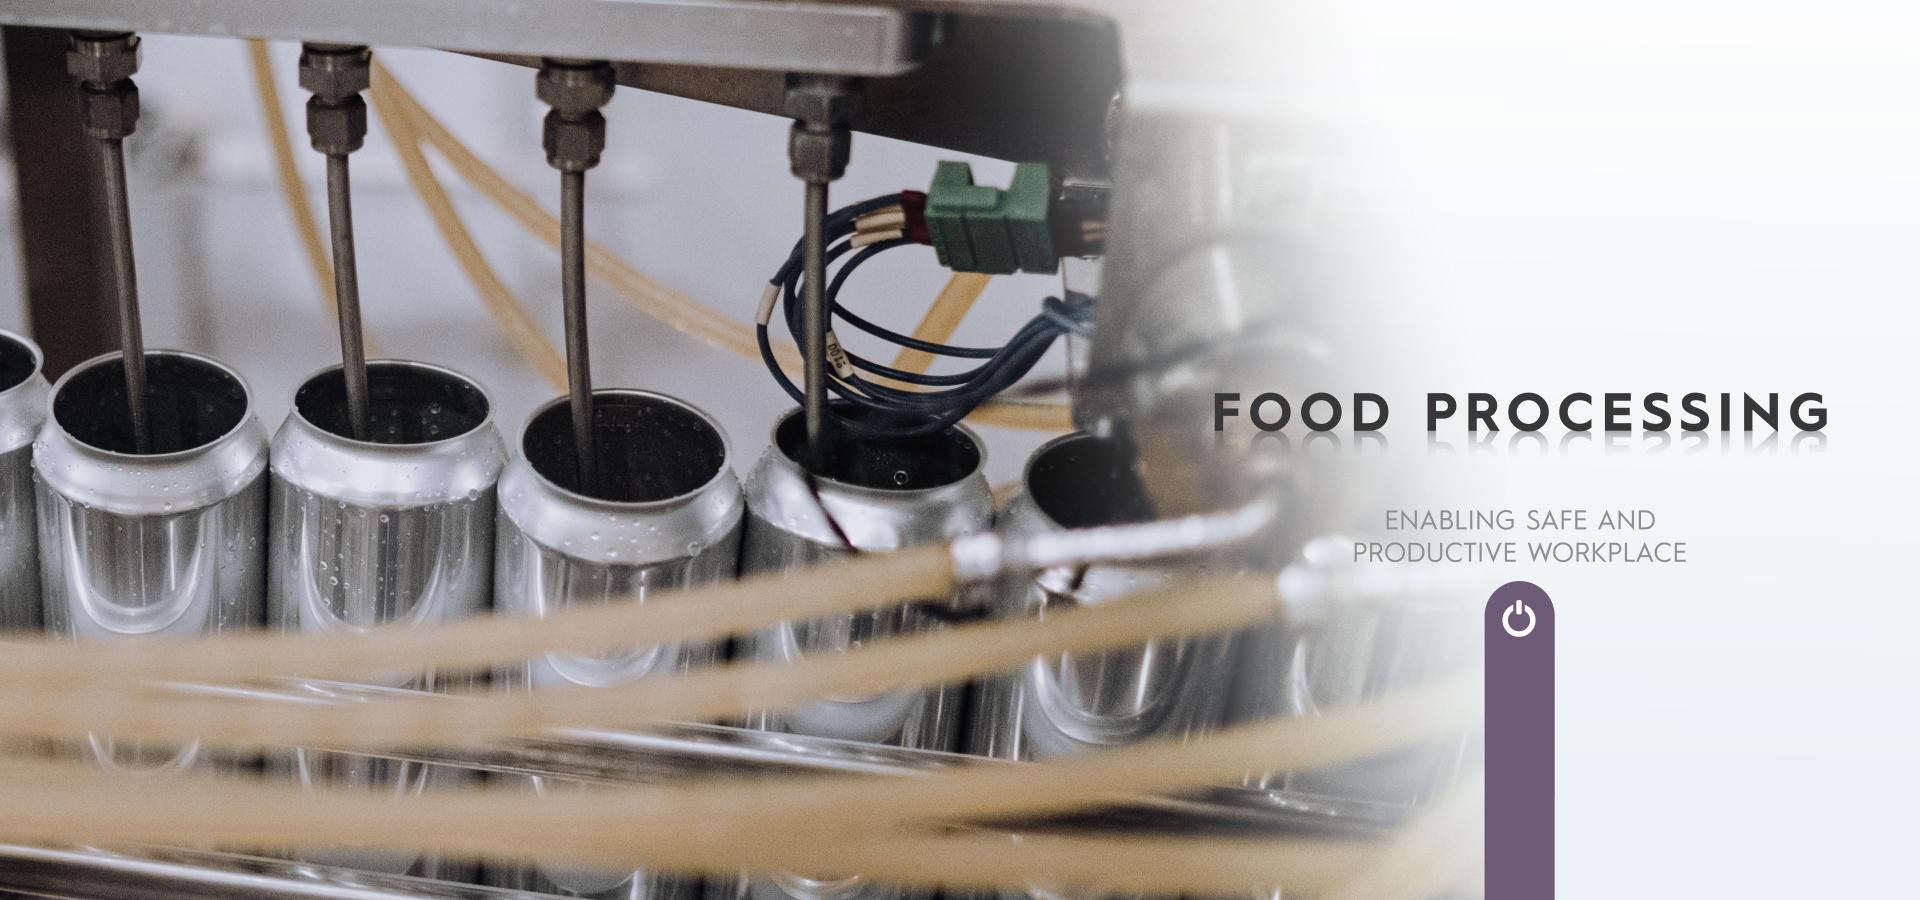 Food processing Industry banner